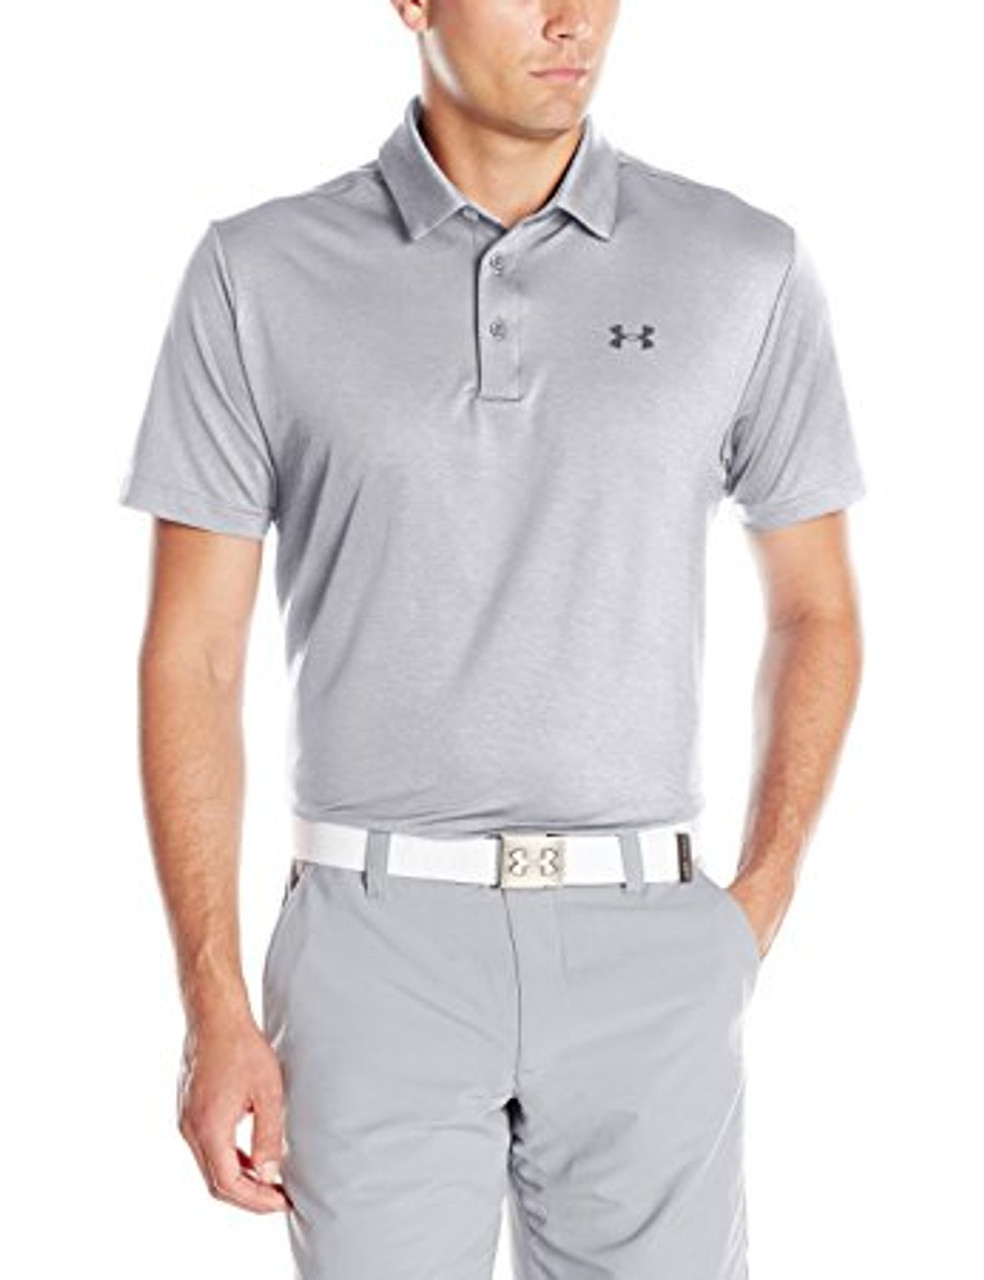 Under Armour Mens Playoff Polo - S - Overcast Gray/Stealth Gray 1253479-944-GRY-S - Jacob Time Inc